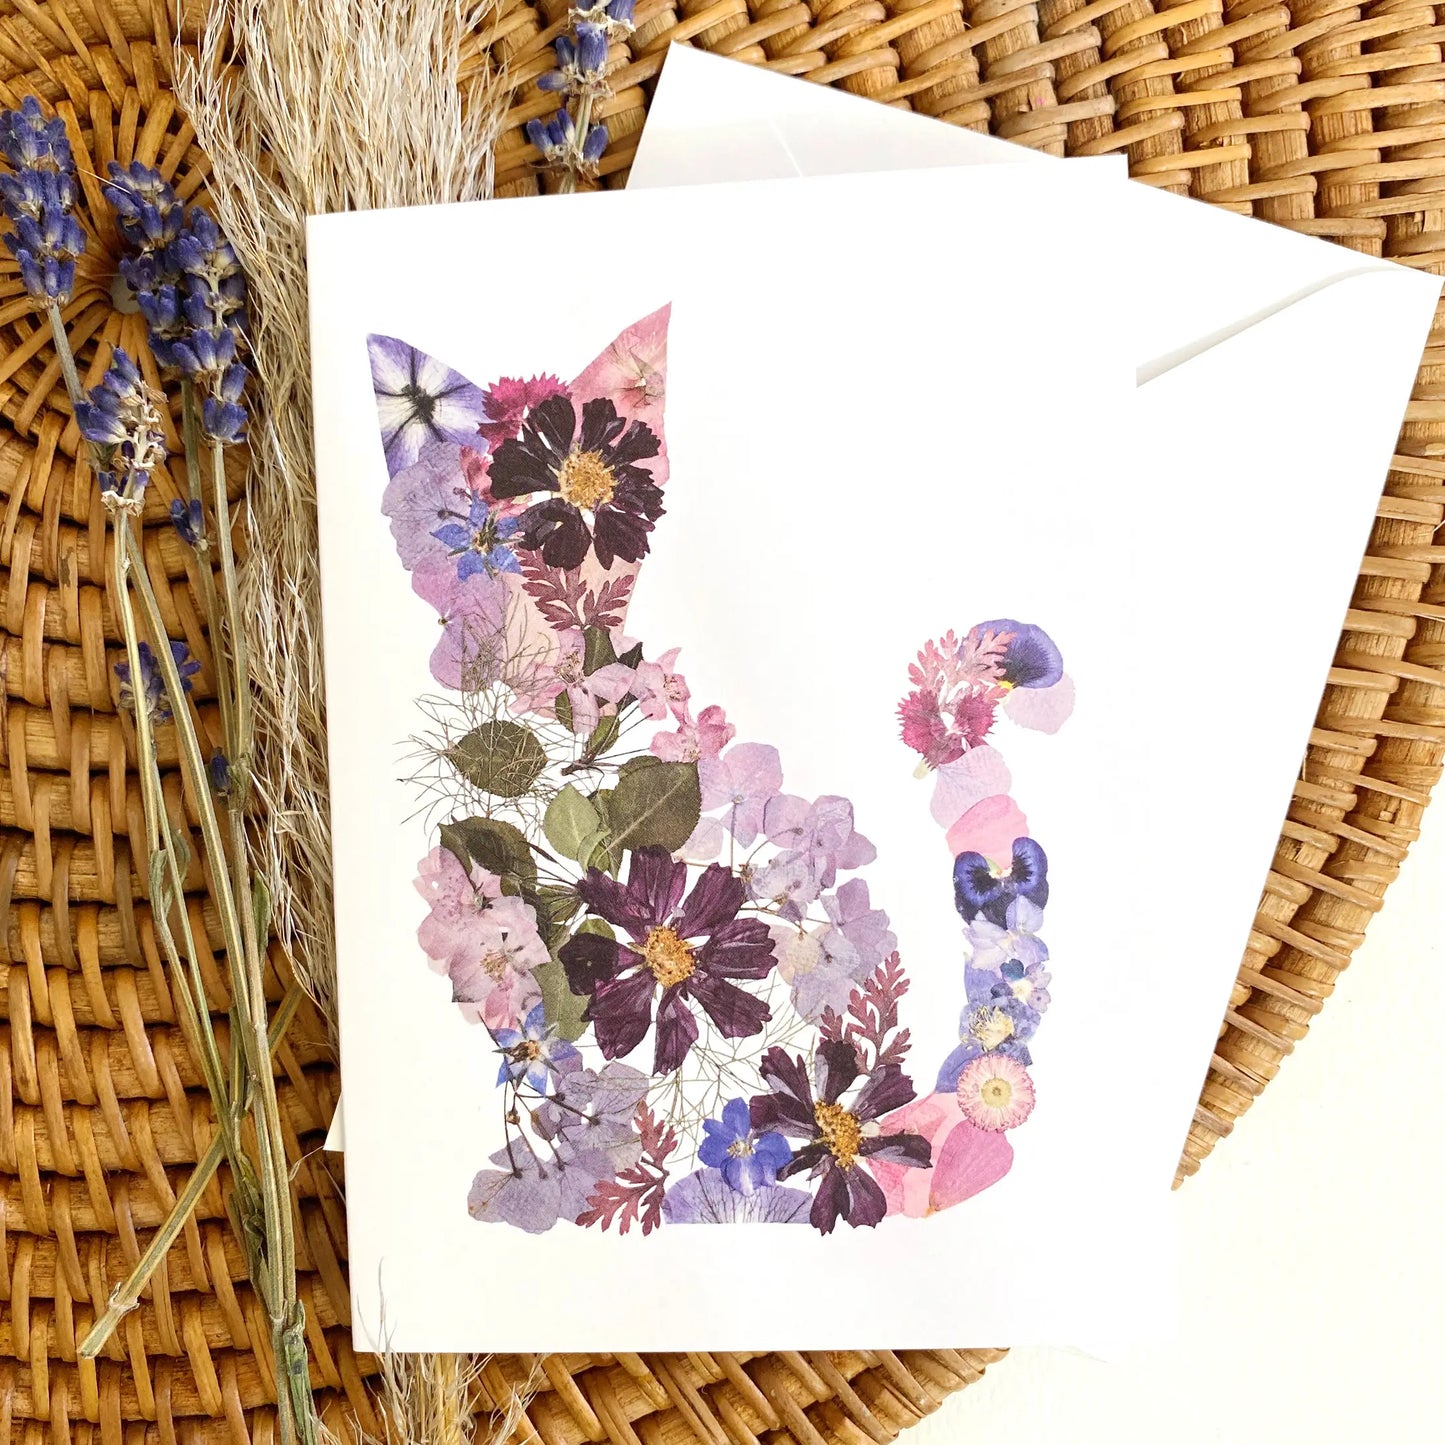 OFC - Cat Pressed Flower Art Greeting Card